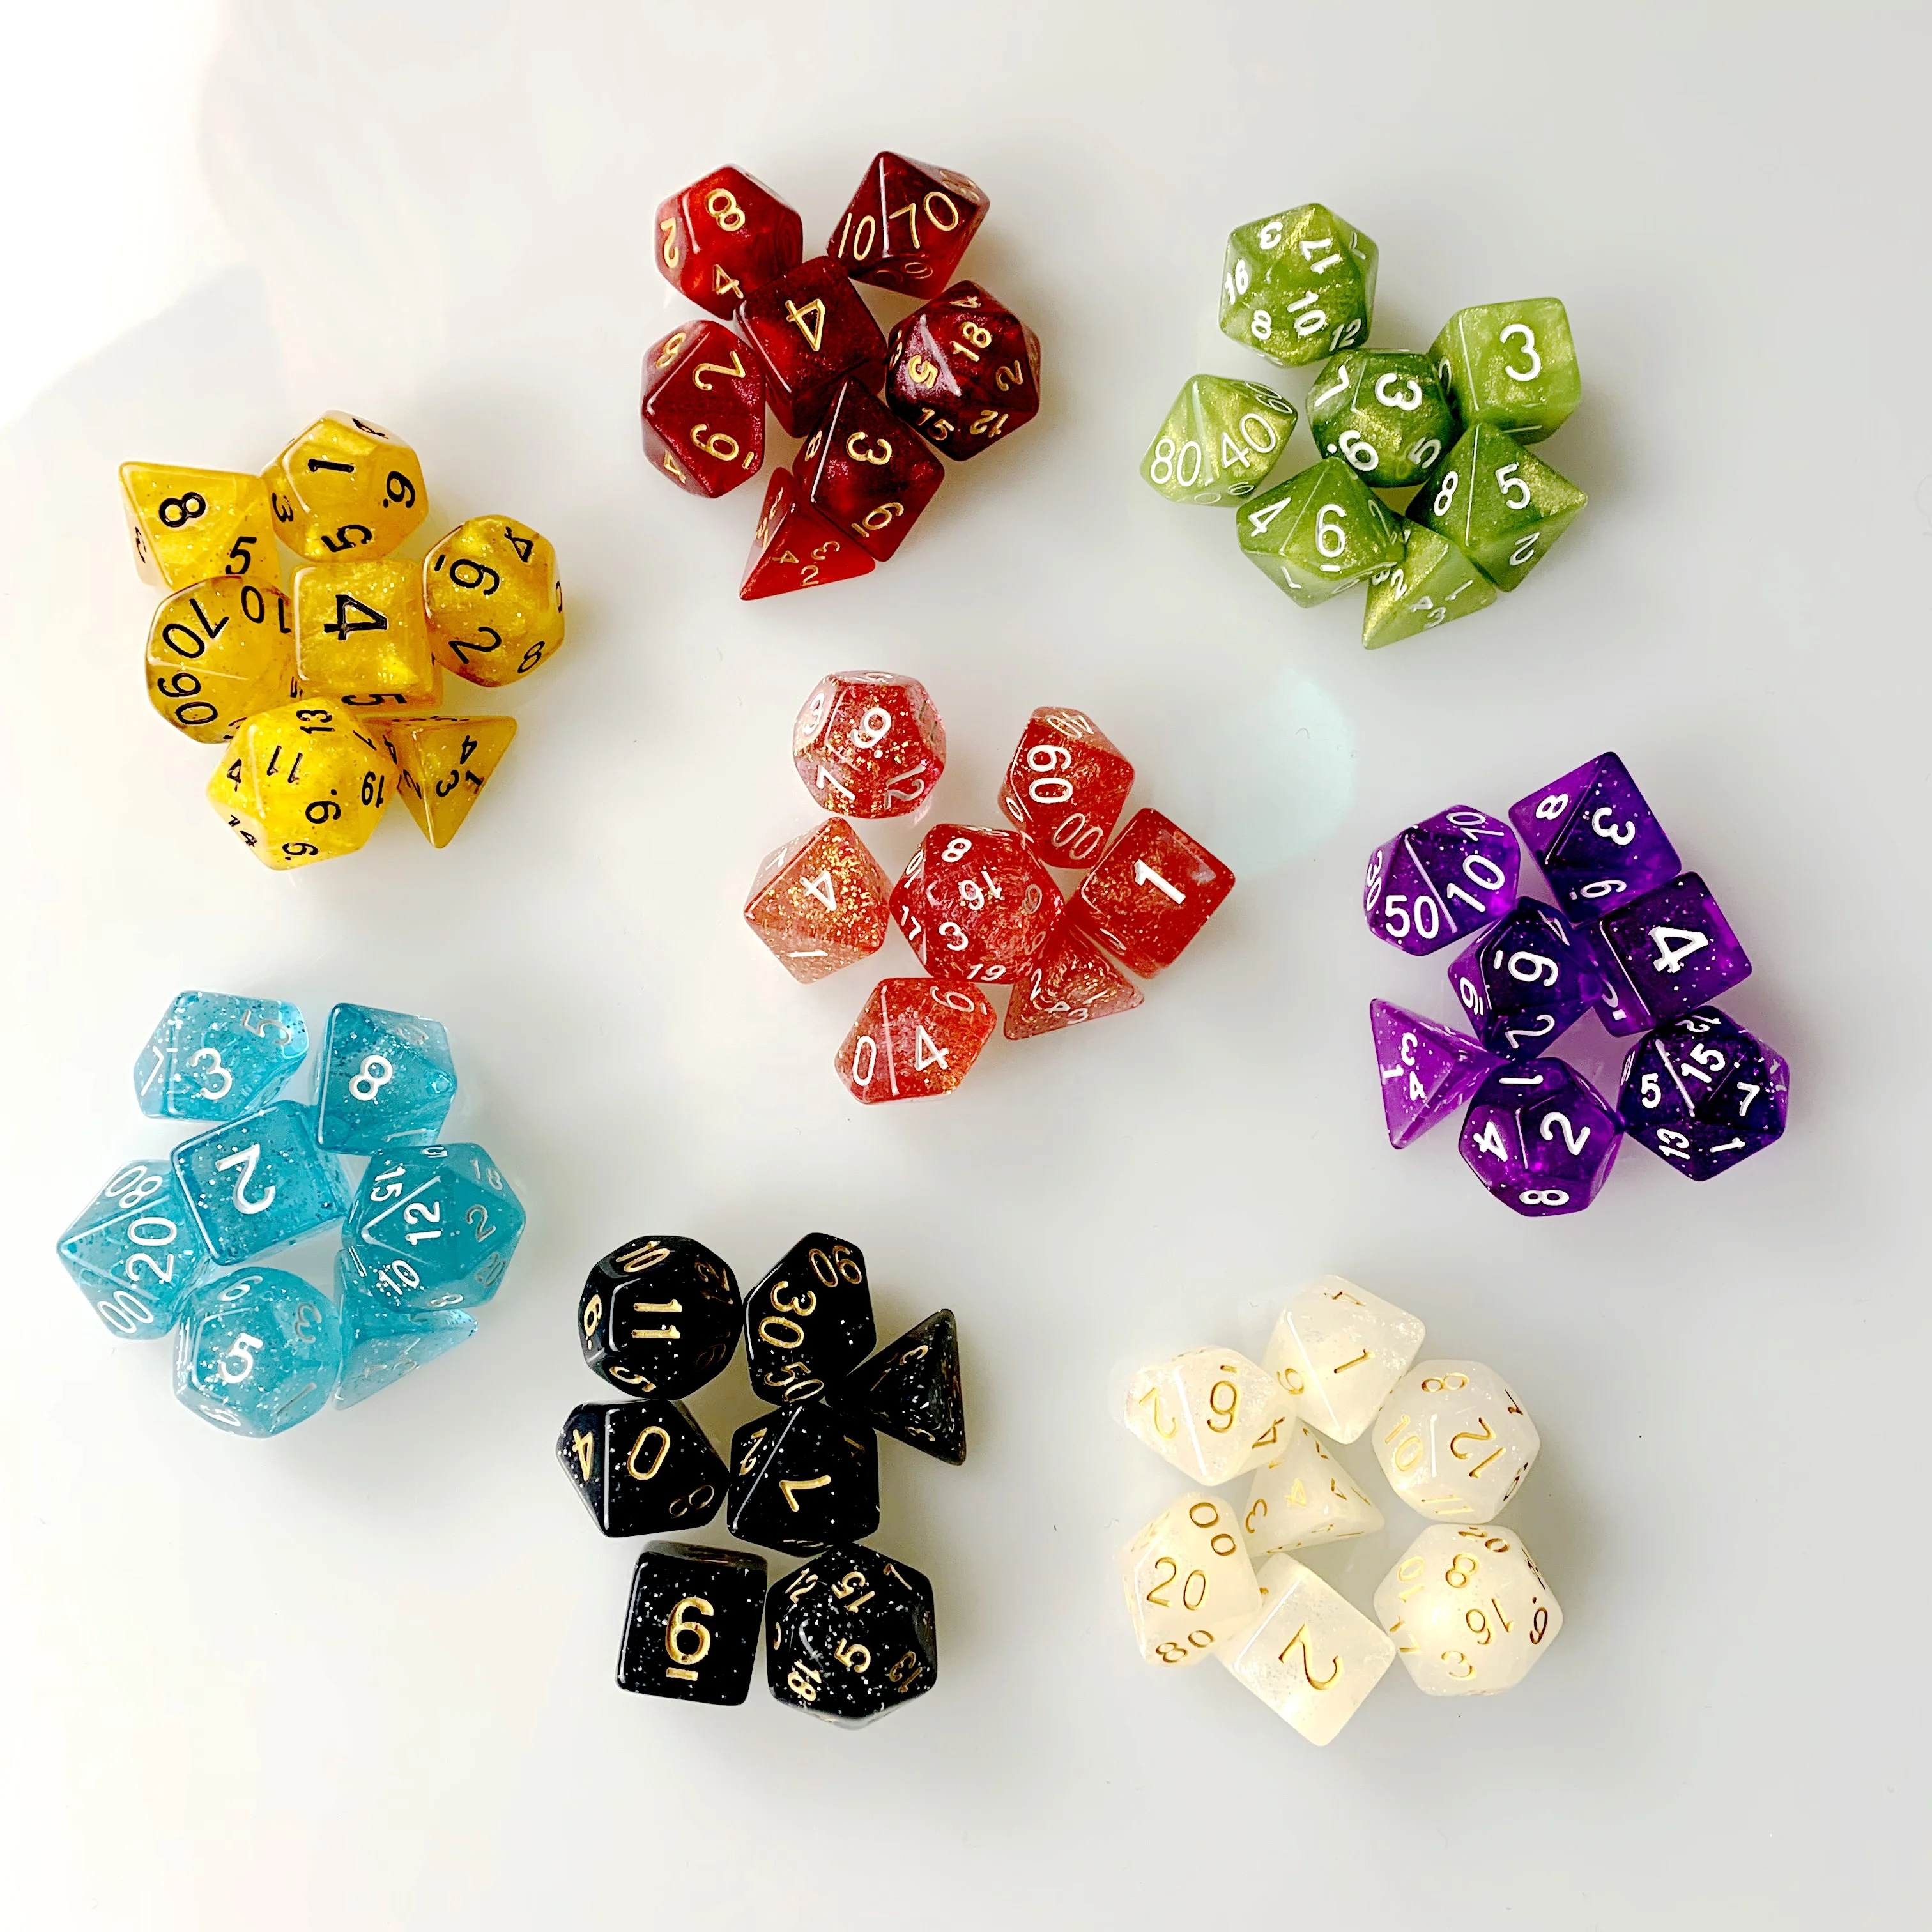 

wholesale polyhedral exercise new 16 side multi side dice digital dice toy game counting with numbers set dices